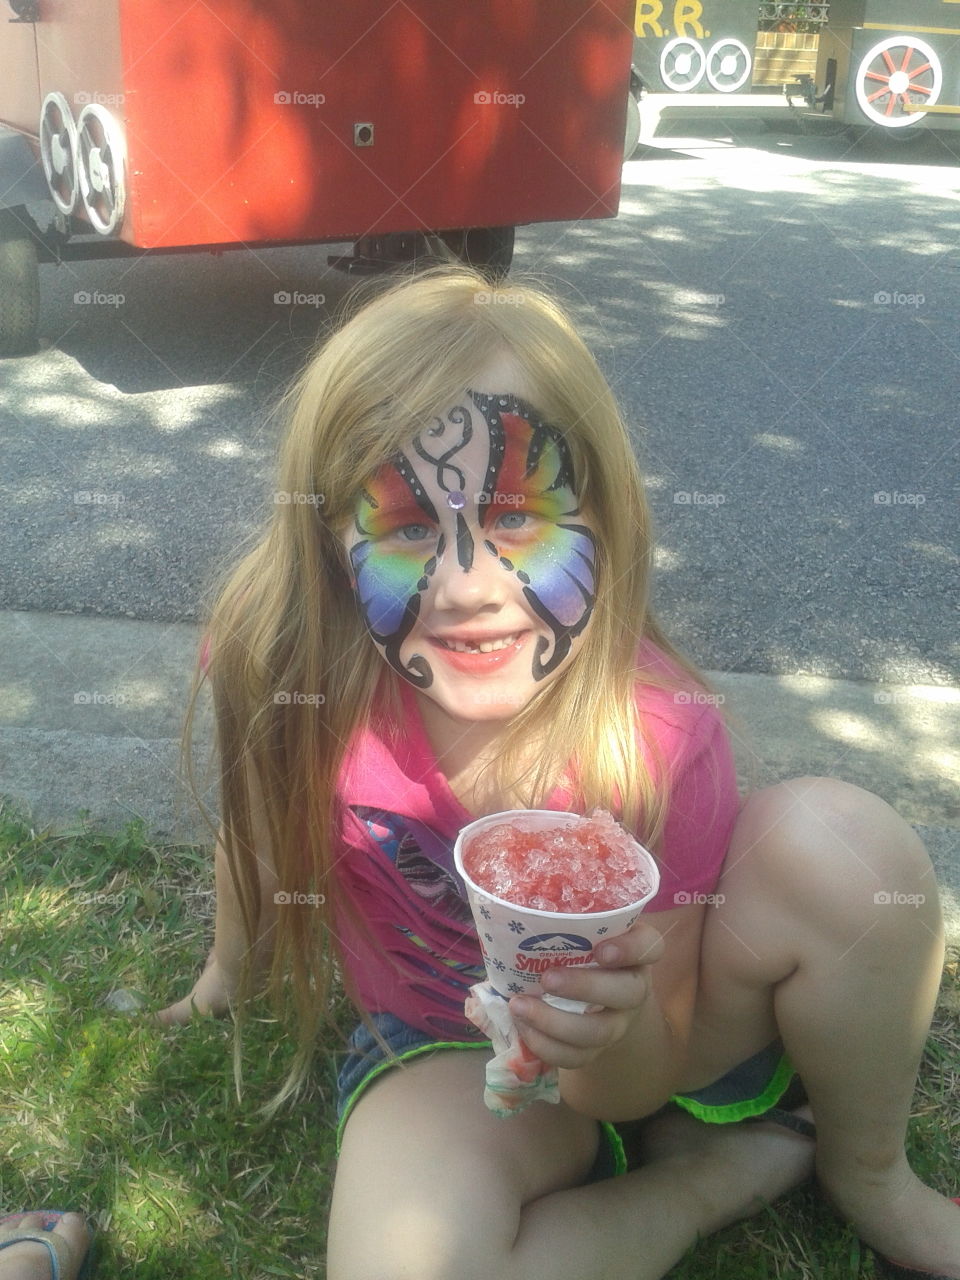 Butterfly girl. I took a friend's daughter to an art festival and she wanted her face painted.